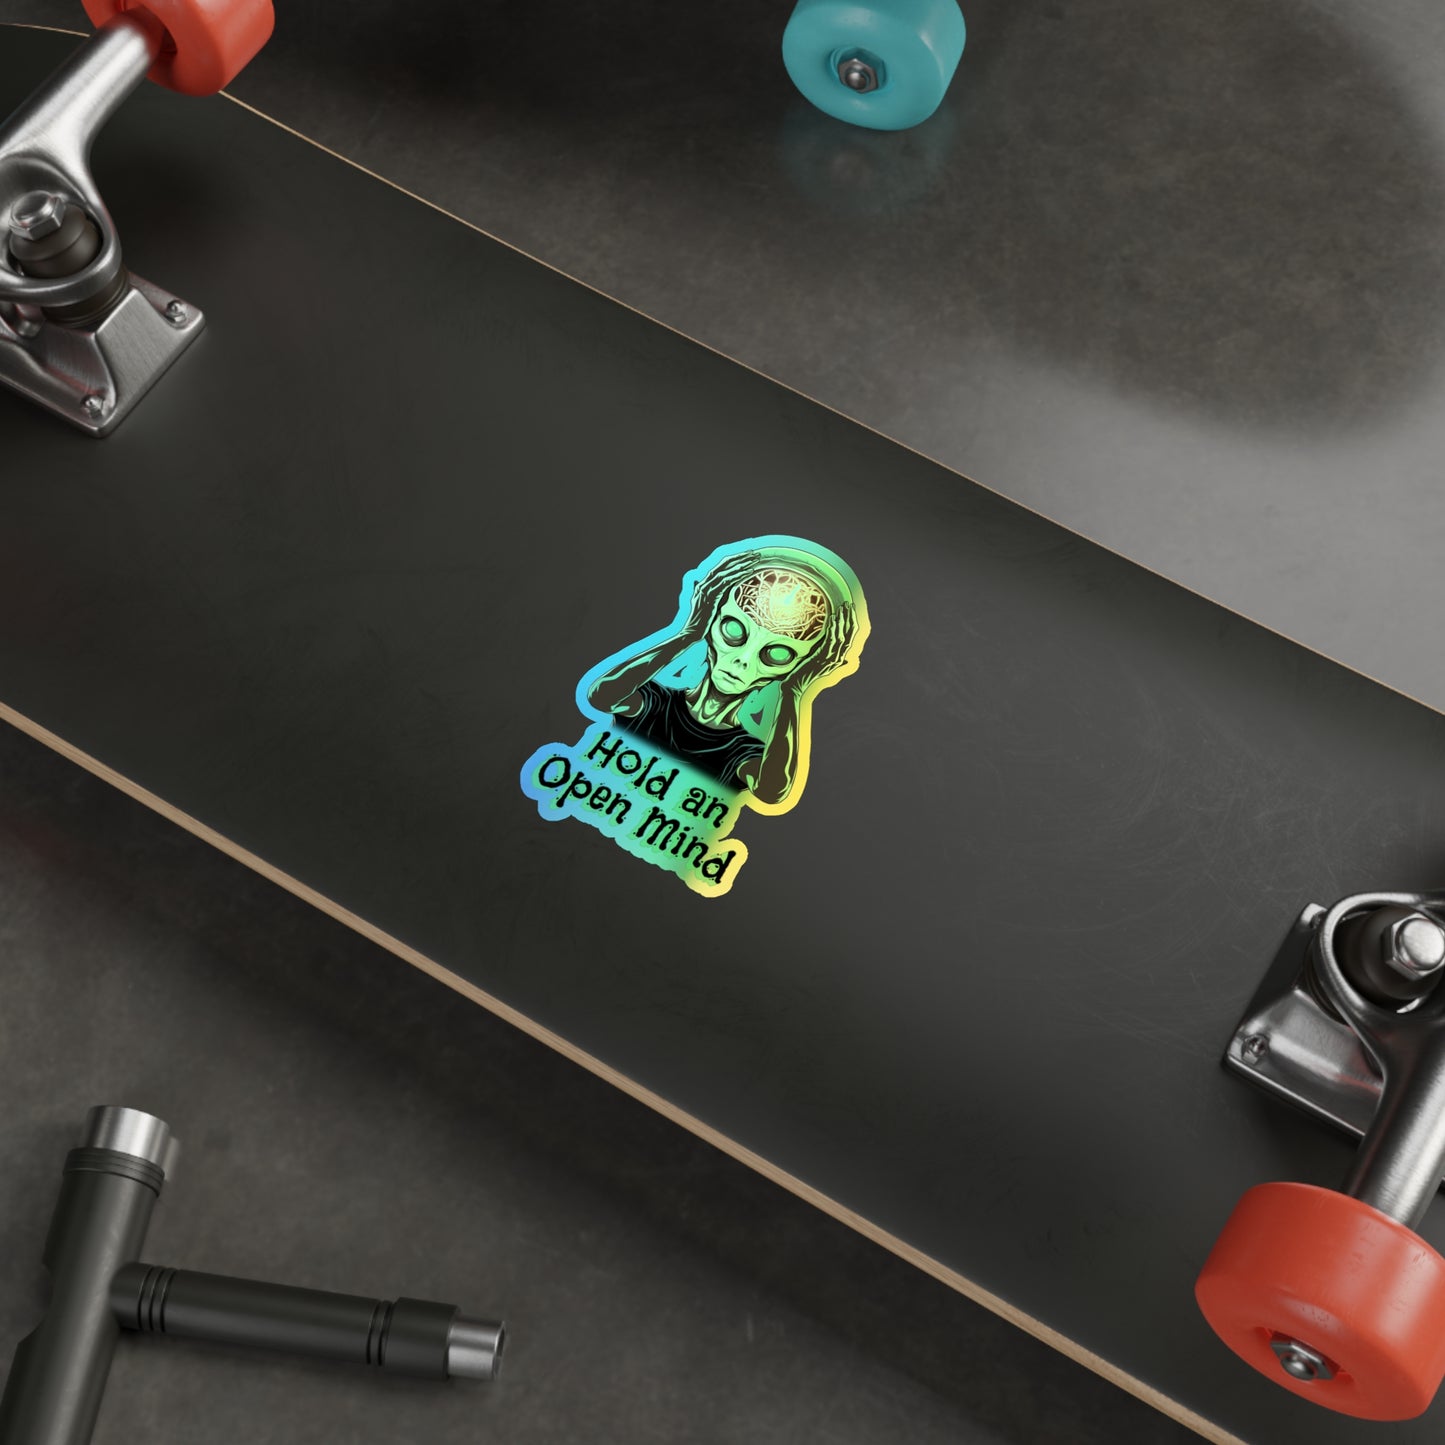 Open Mind | Holographic Die-cut Stickers